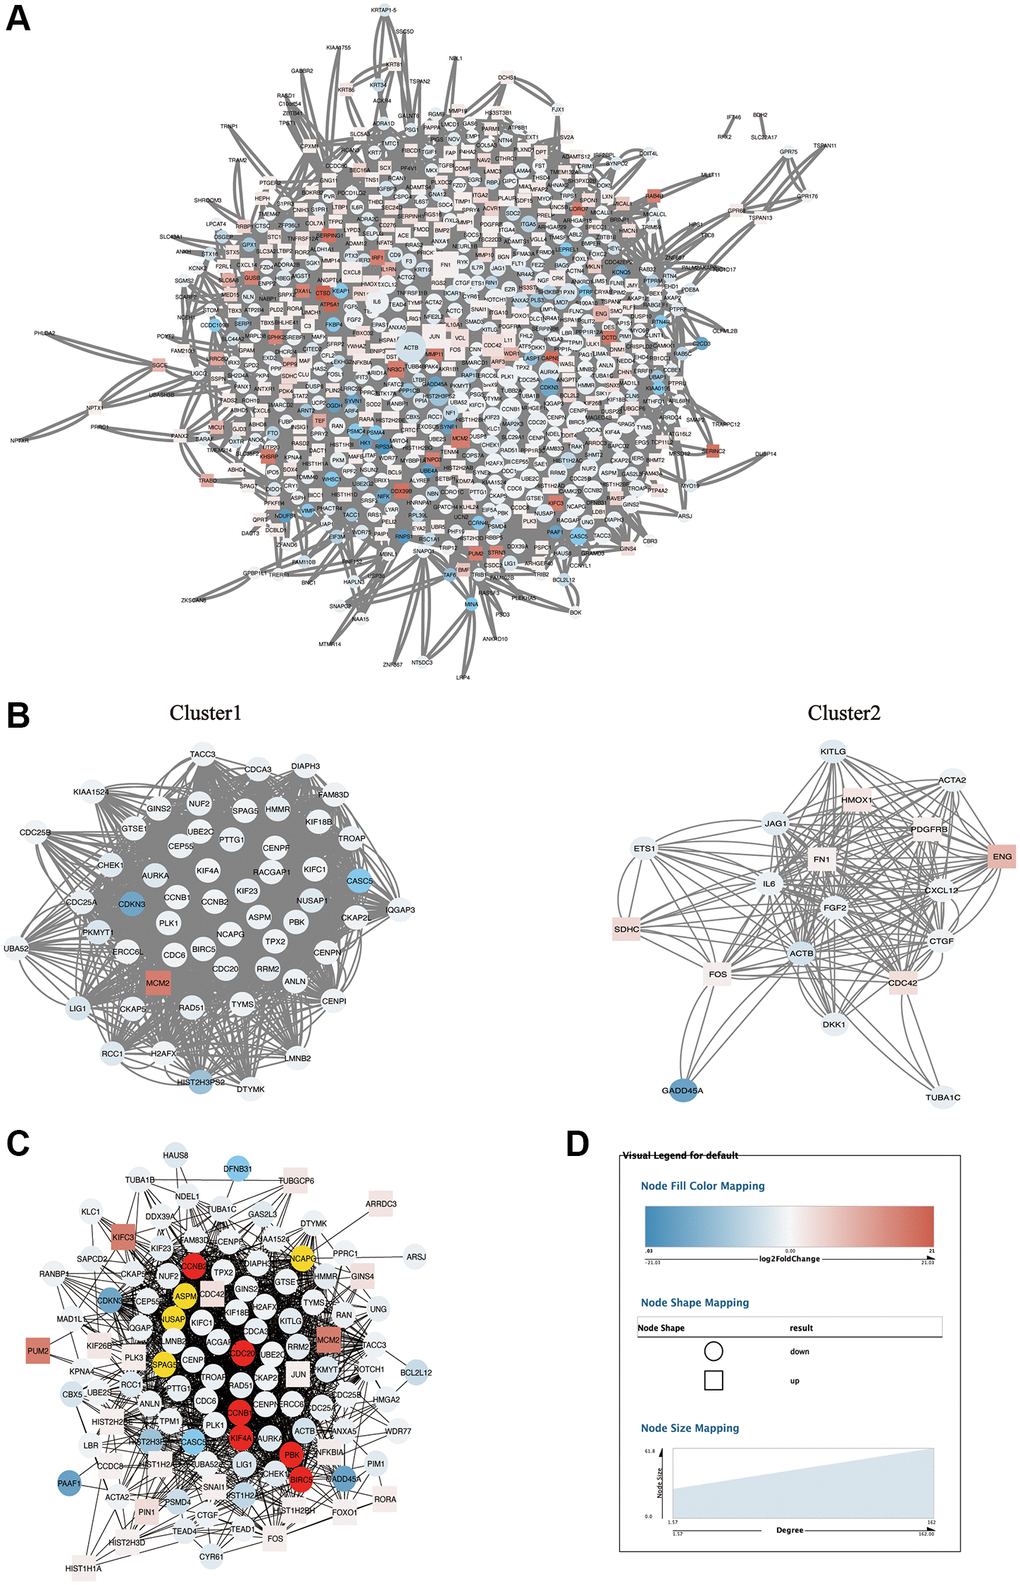 PPI network analysis of DEGs. (A) The PPI network of 698 DEGs. (B) Cluster1 and cluster 2 sub-networks obtained after MCODE analysis of PPI network. (C) MCC sub-network obtained after CytoHubba analysis of PPI network. (D) The legend of networks. The round represents down-regulated DEGs, the square represents up-regulated DEGs, and the size of the node graph represents the degree for (A), which denotes the number of nodes connected to each node. The colors of the nodes indicate the size of log2 (fold change). The higher and lower the expression is, the redder and bluer it is, respectively.